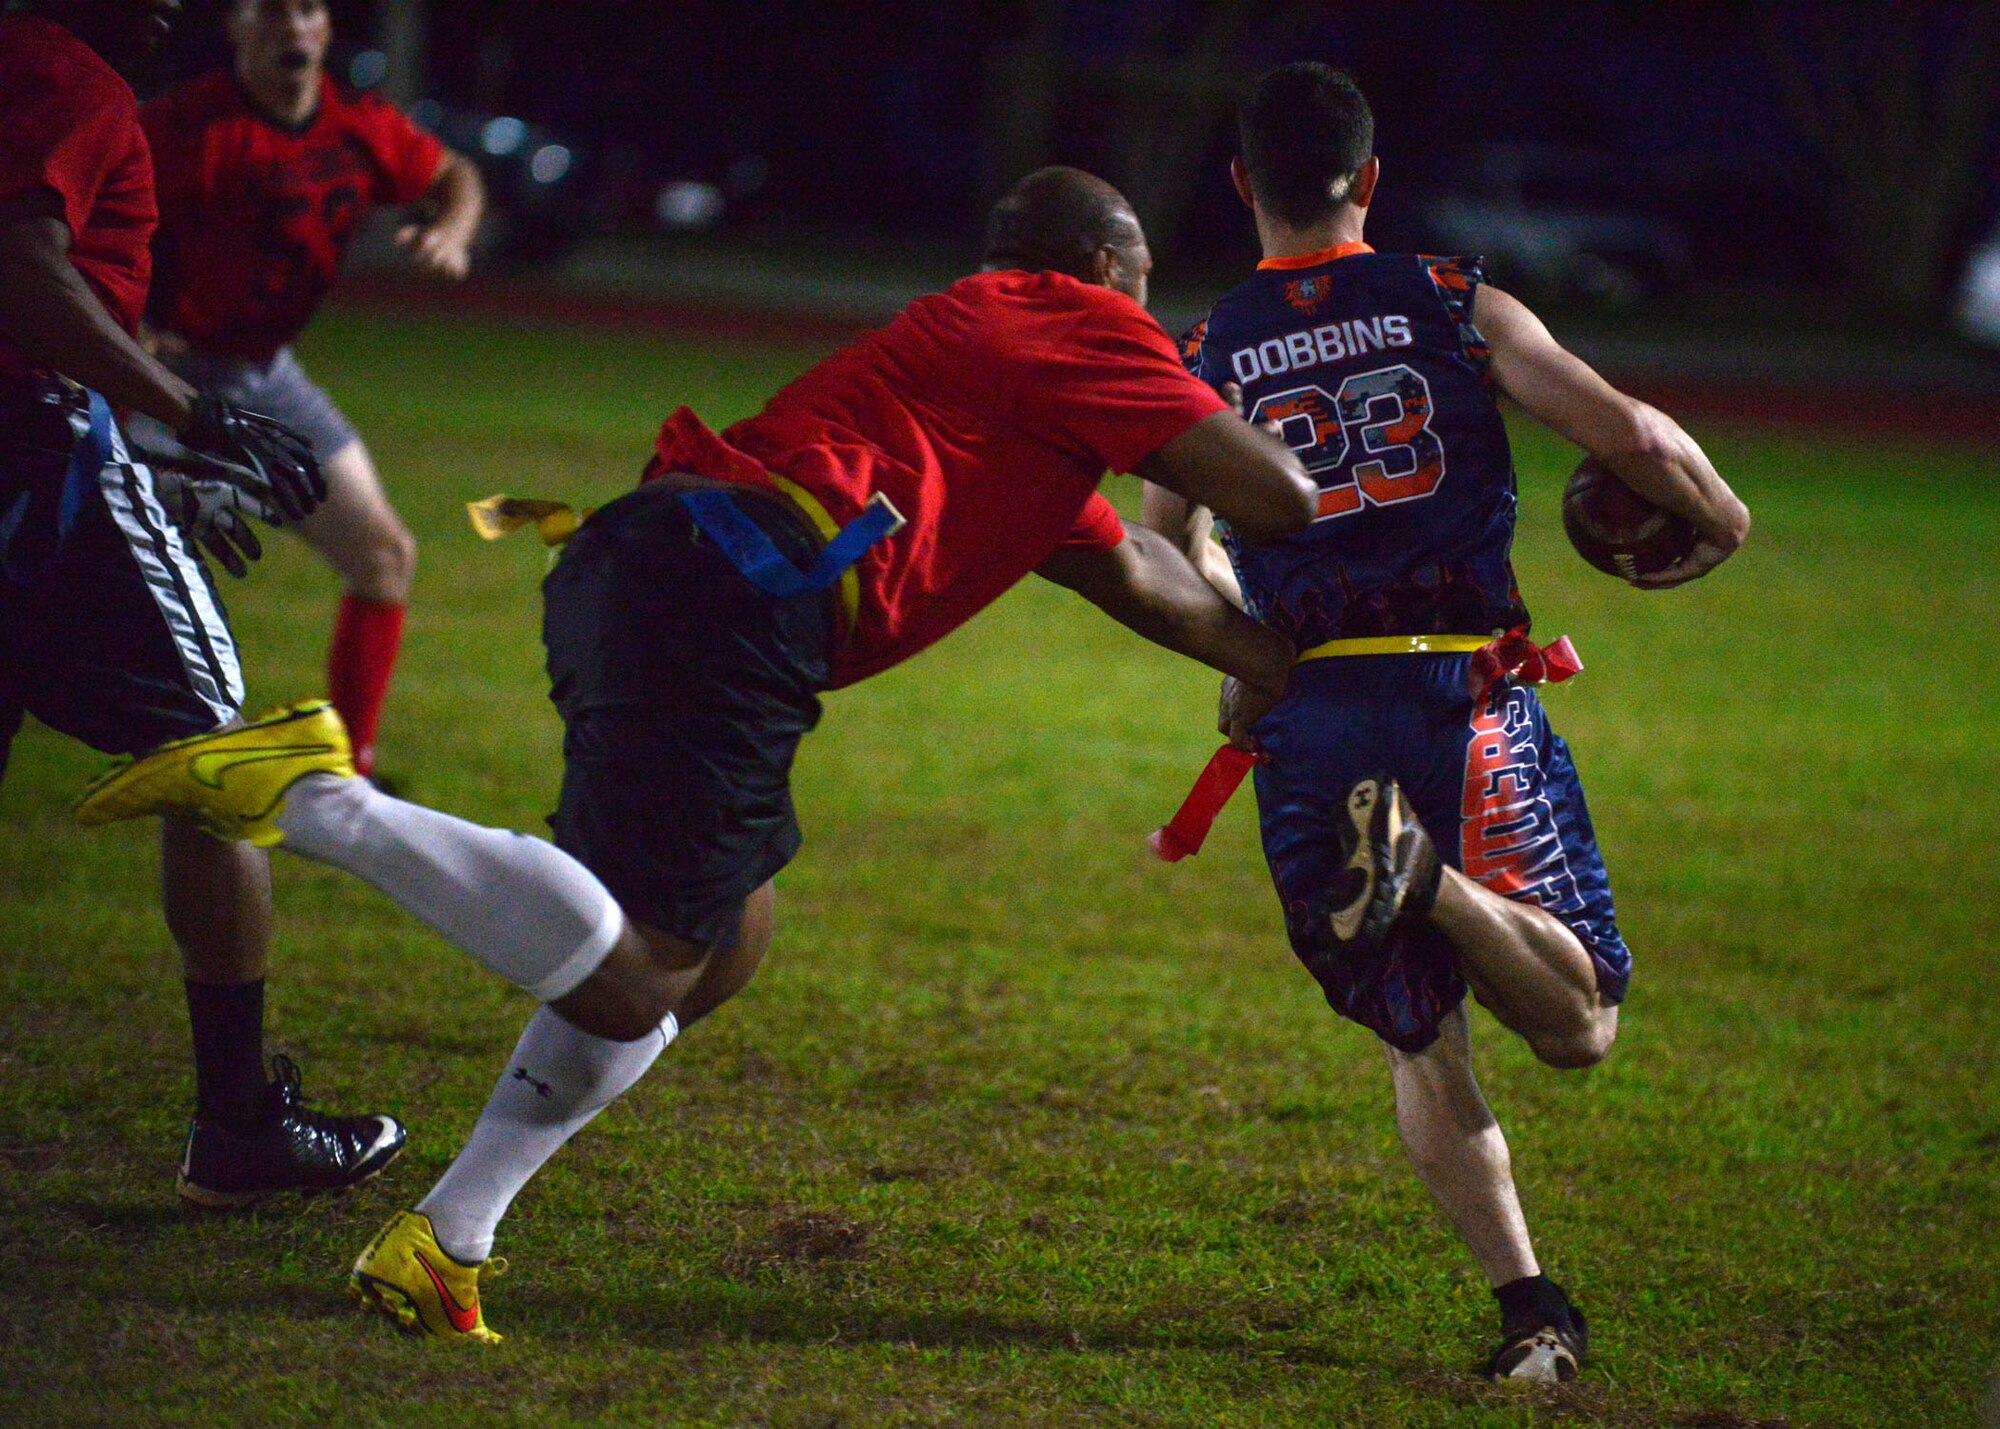 A 664th Combat Communications Squadron member attempts to pull a flag from a 36th Security Forces Squadron member during the flag football championship, April 20, 2015. The 36th SFS defeated the 664th CBCS 14-0 in the championship. (U.S. Air Force photo by Airman 1st Class Joshua Smoot/Released)